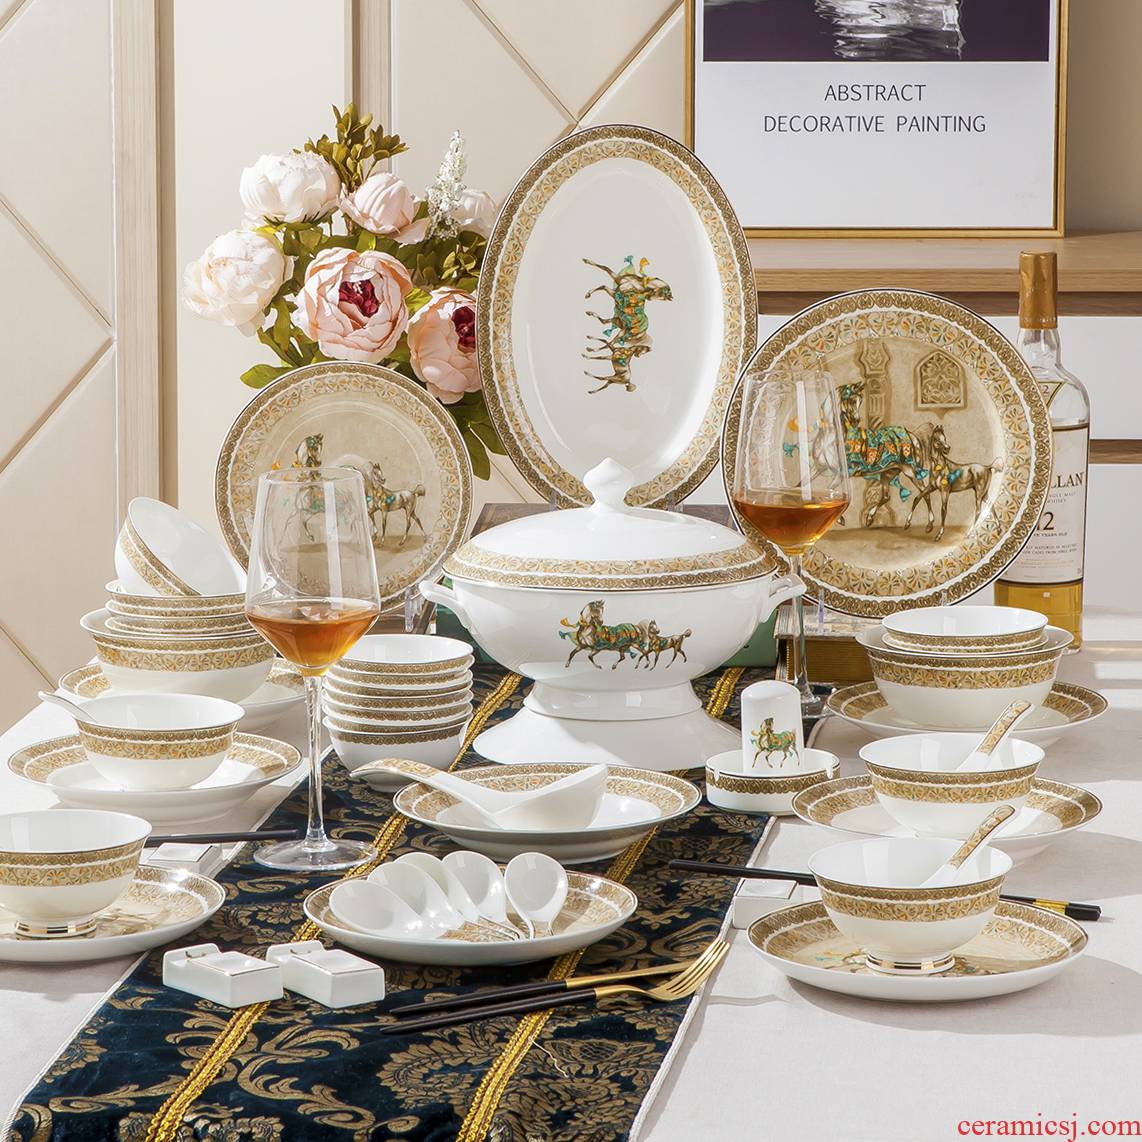 Dishes suit household combination of European jingdezhen ipads porcelain tableware Dishes chopsticks Chinese ceramic bowl Dishes for dinner